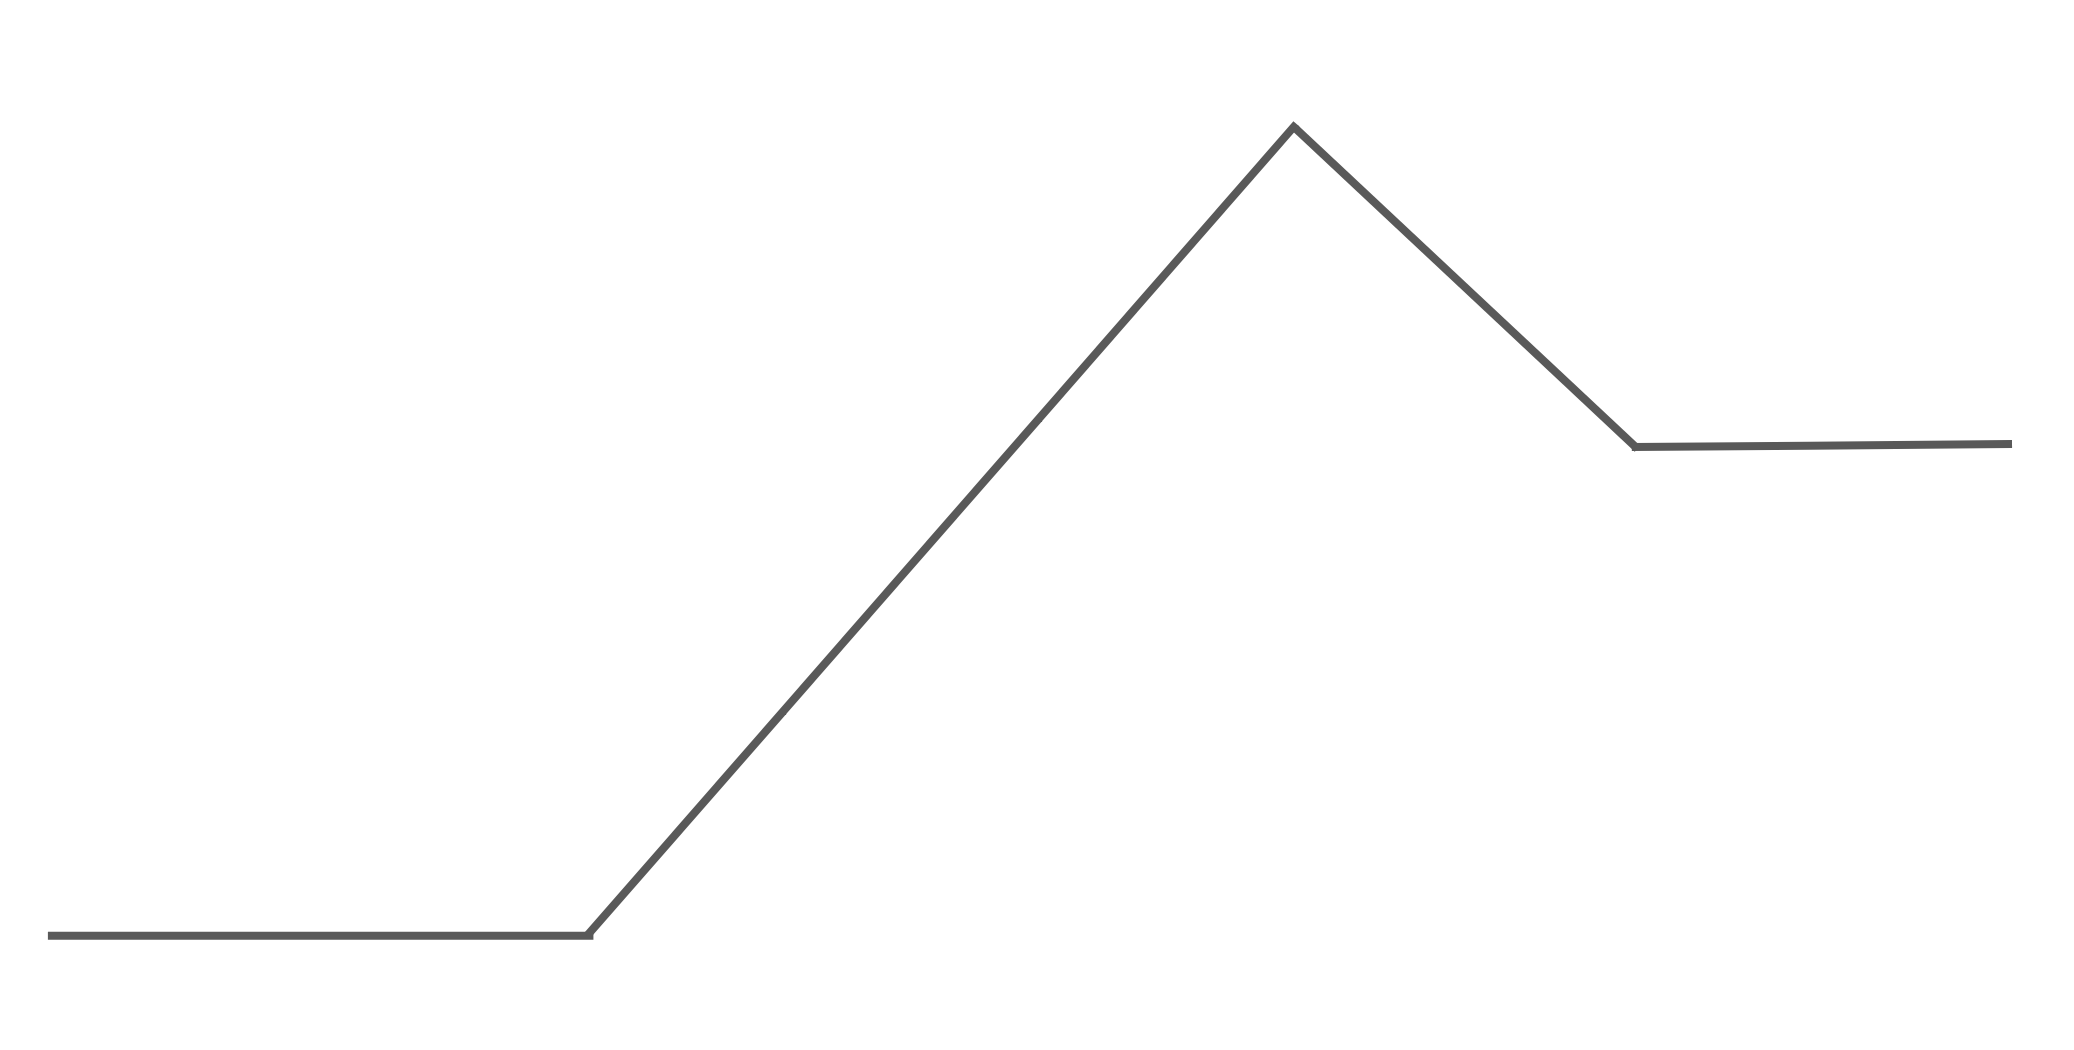 Freytag's Pyramid: a straight line at the bottom left which then goes up at 45 degrees to the top and then goes a third of the way down at 45 degrees with a short straight line going to the right side ending it